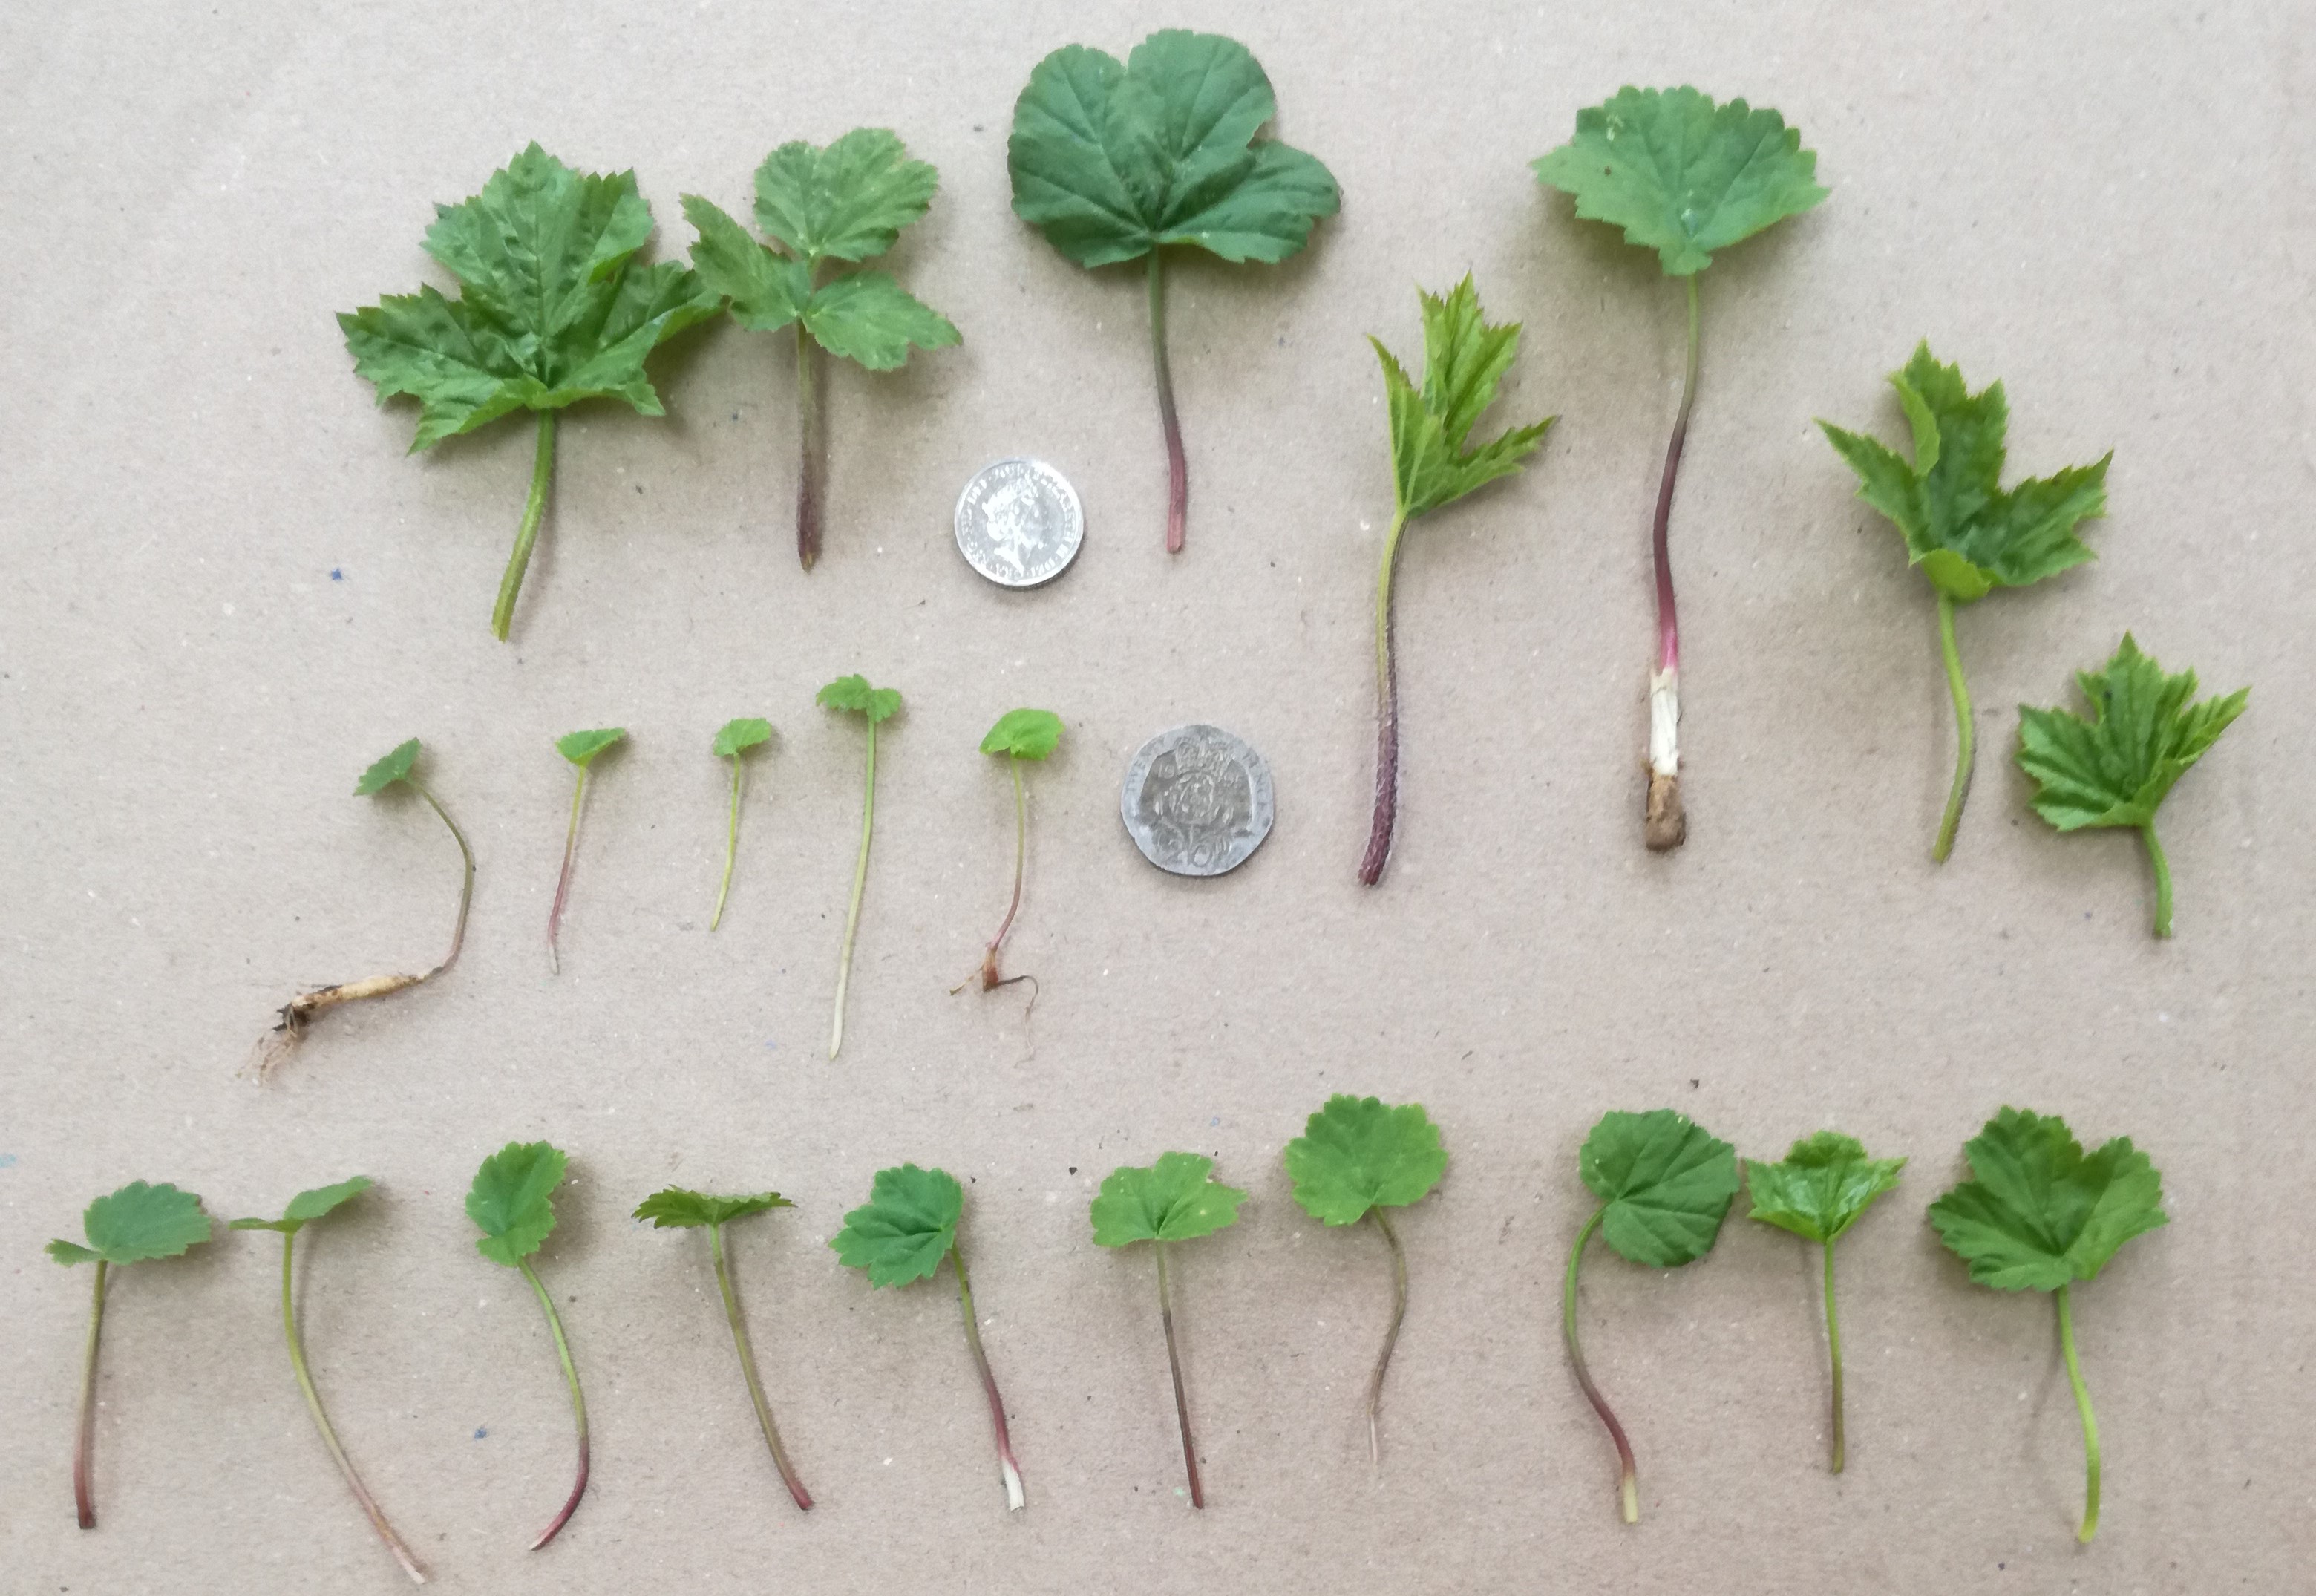 giant hogweed seedlings of various size and morphology